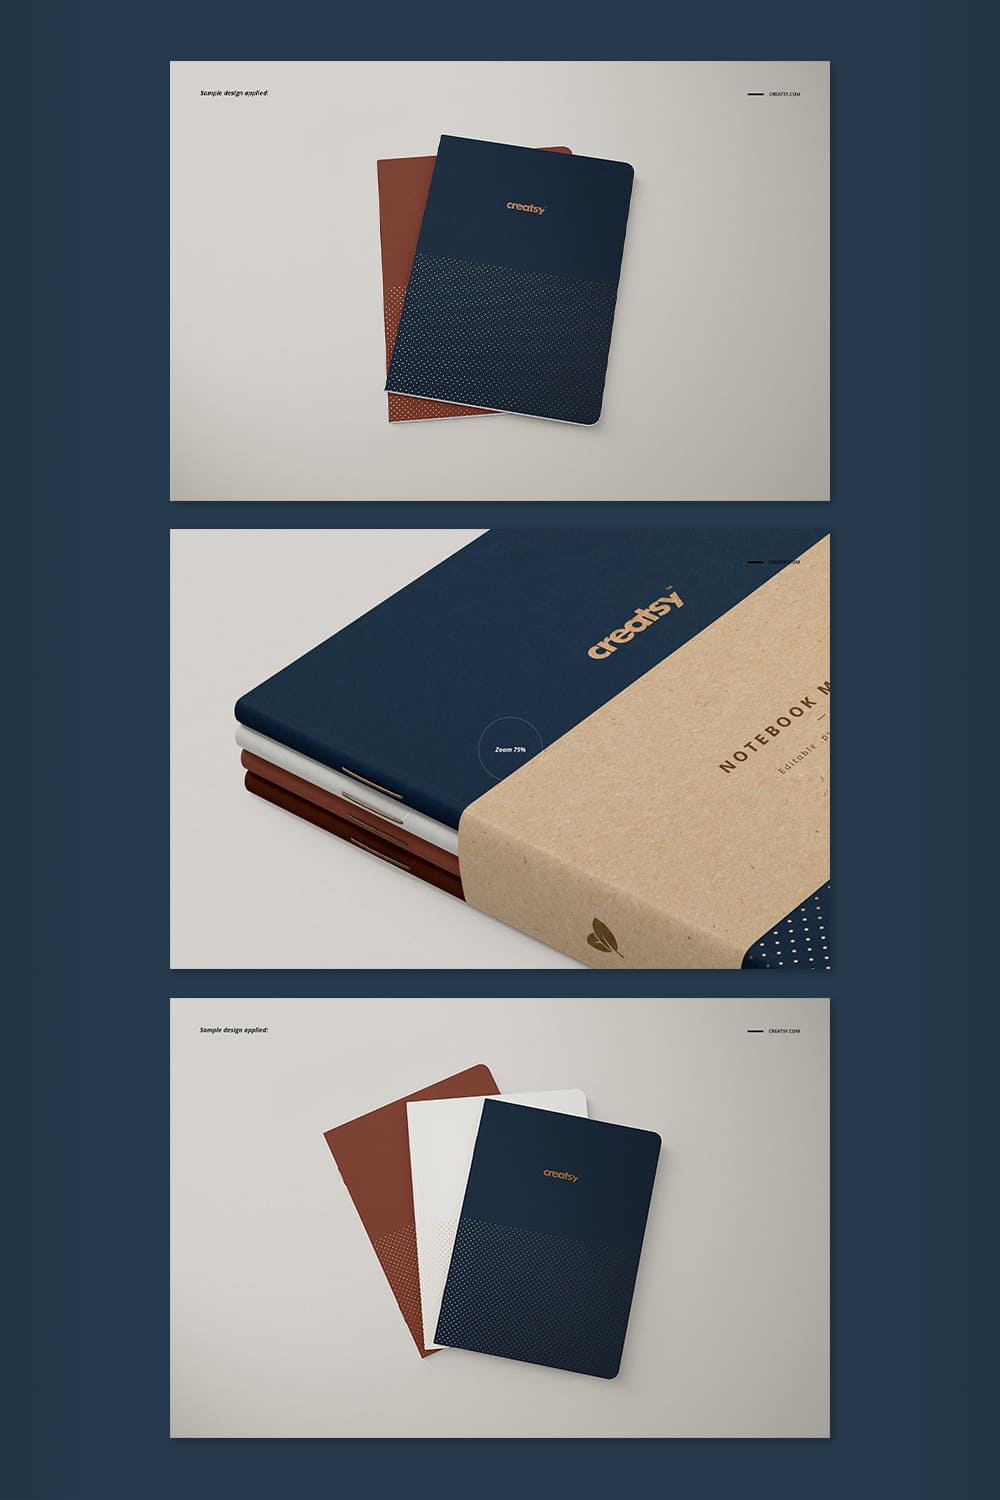 A pack of images of A5 classic notebook with an enchanting design.